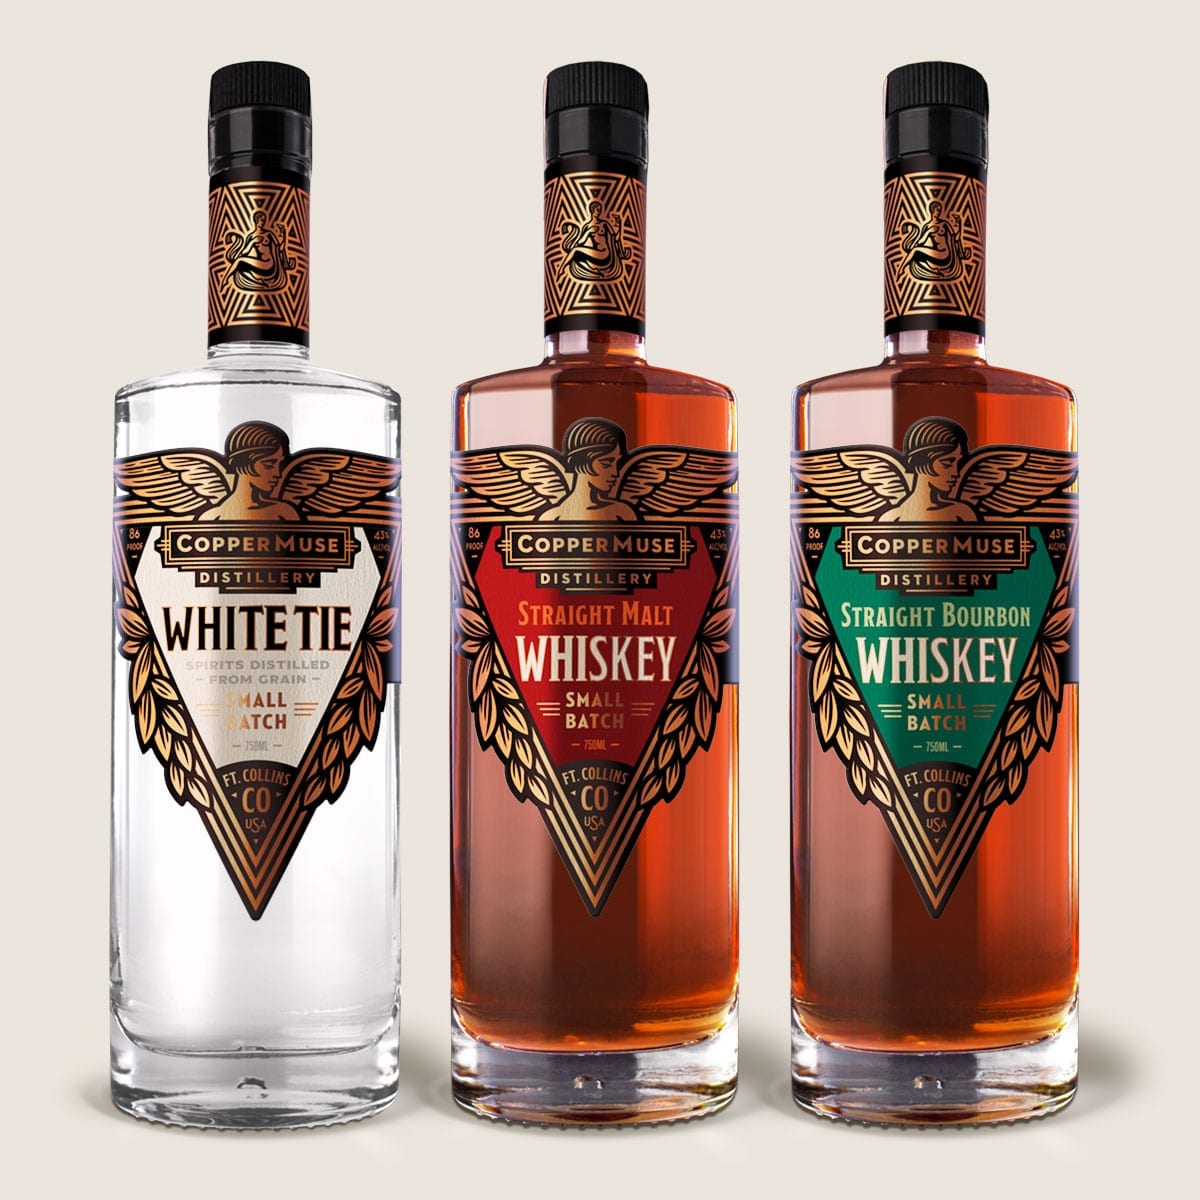 Three bottles of CopperMuse Whiskey with luxurious custom labels.